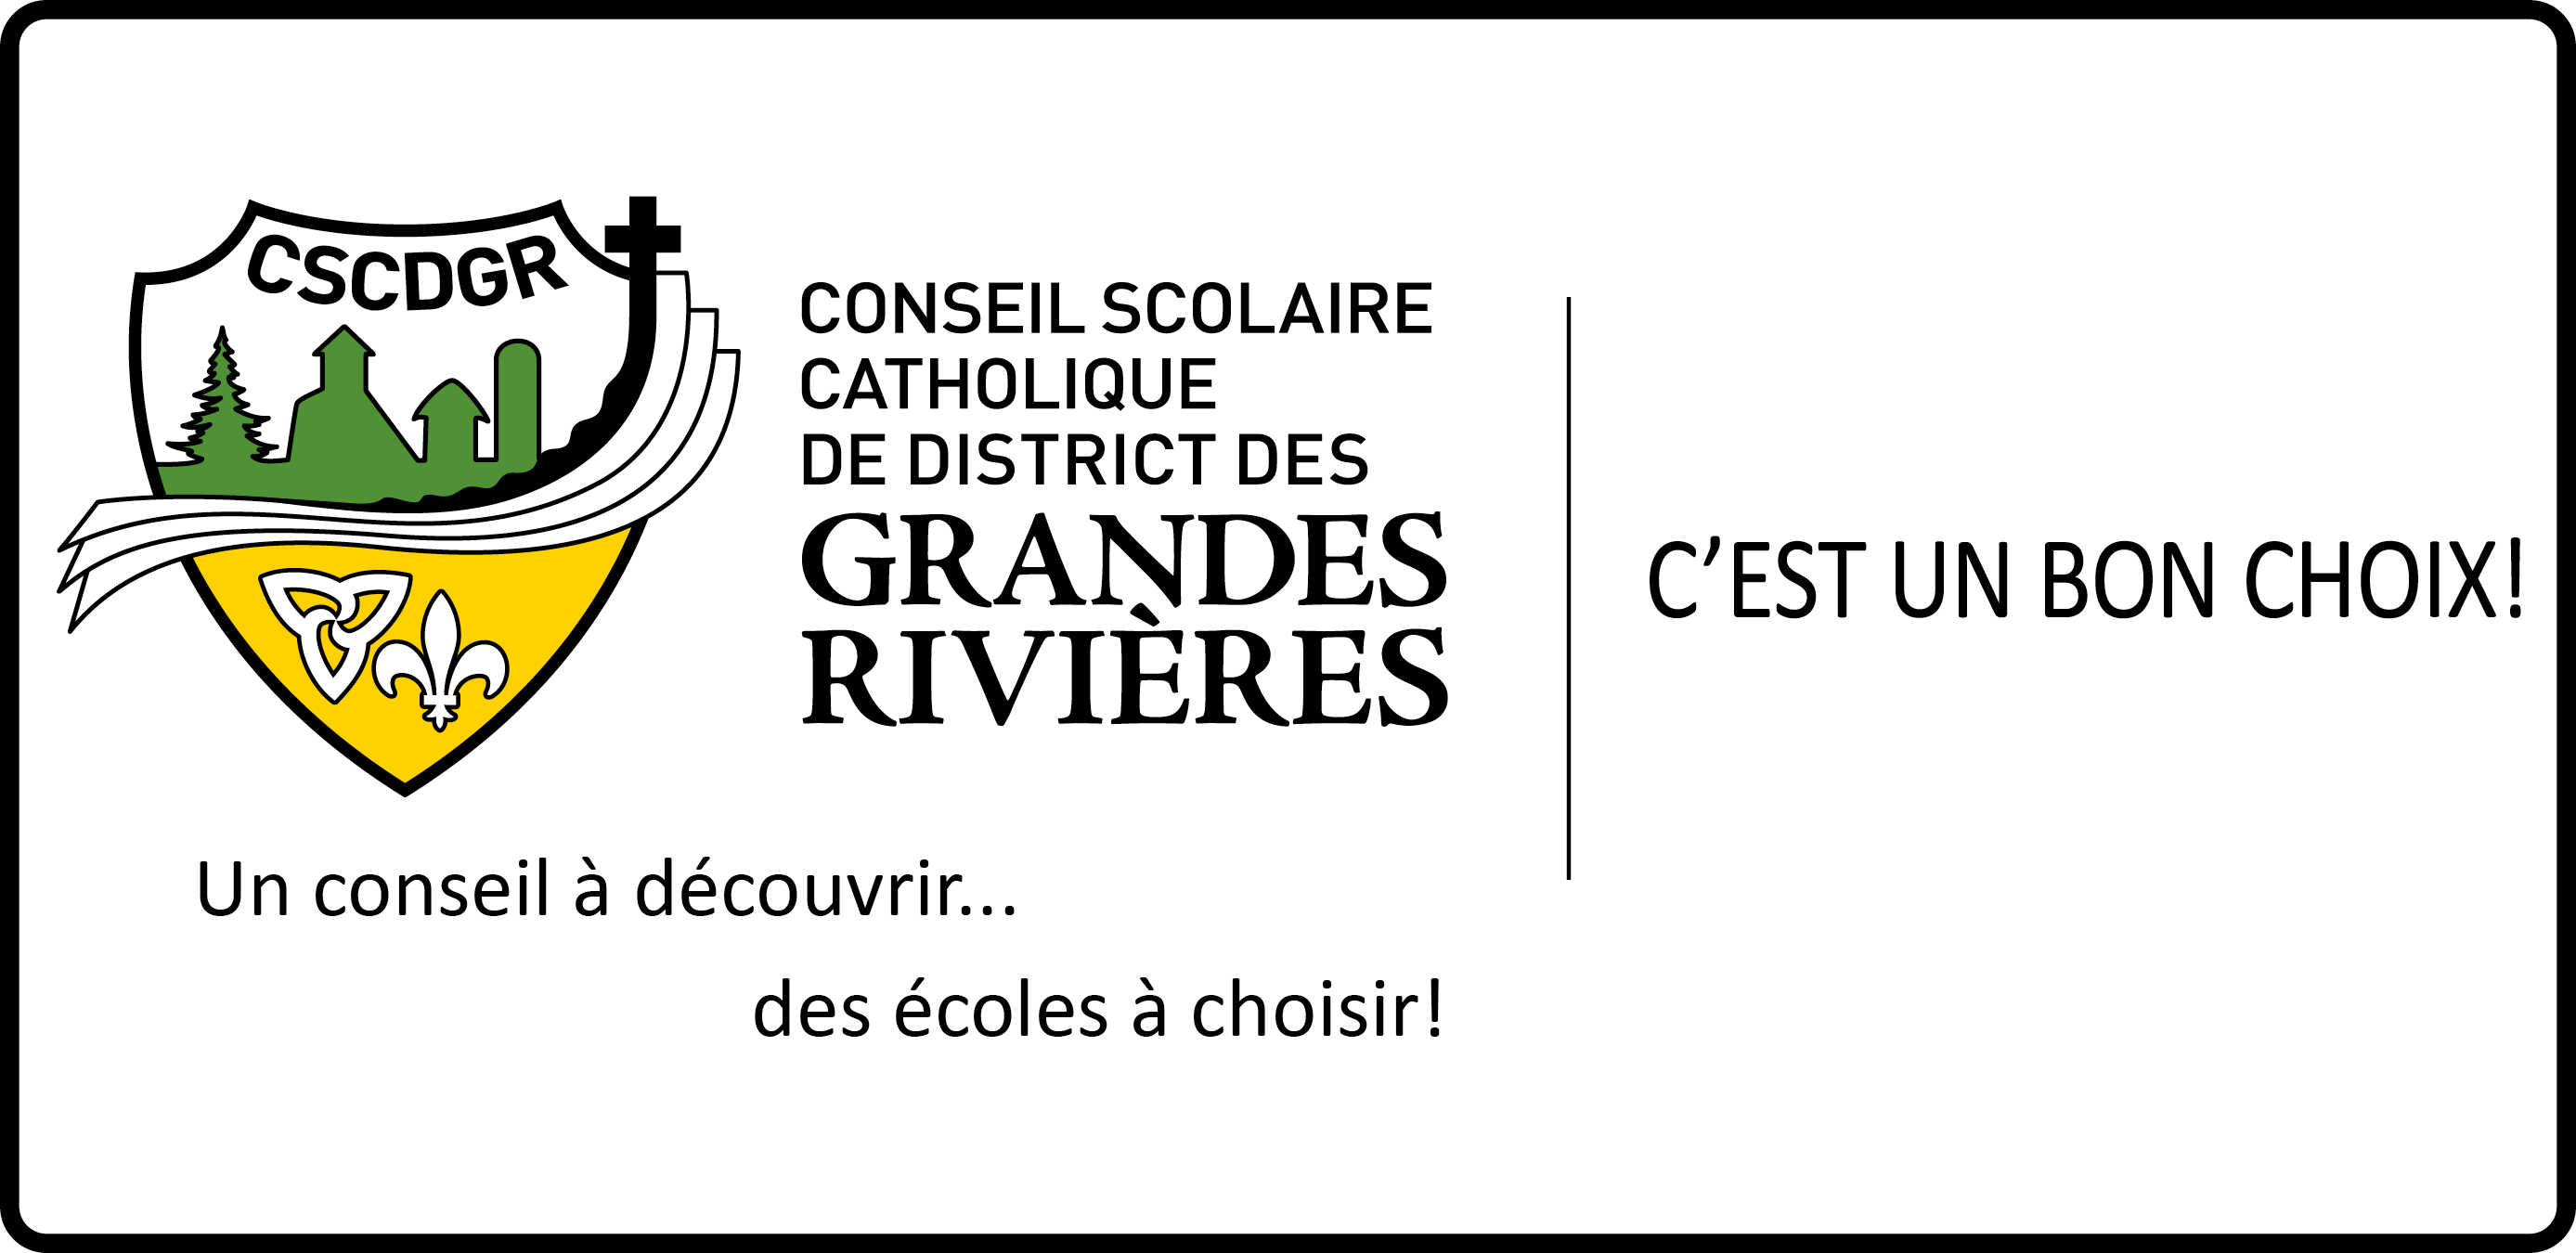 The Grandes Rivieres Catholic District